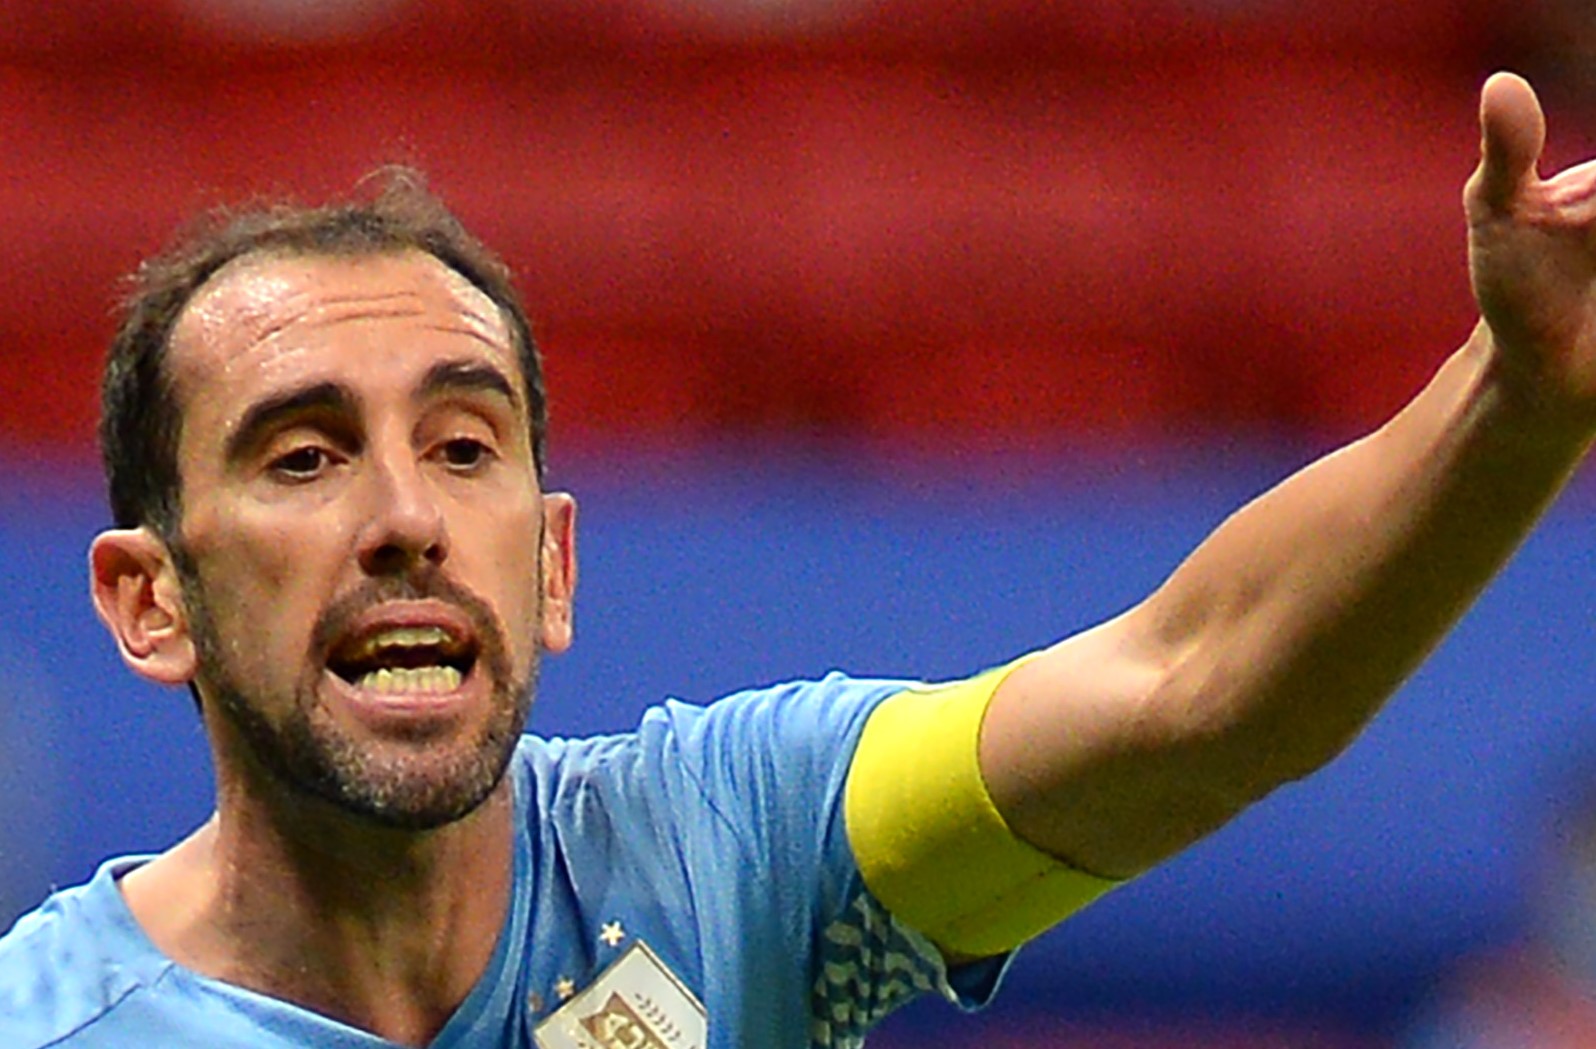 Diego Godin to make first appearance in Argentine football after leaving Brazil